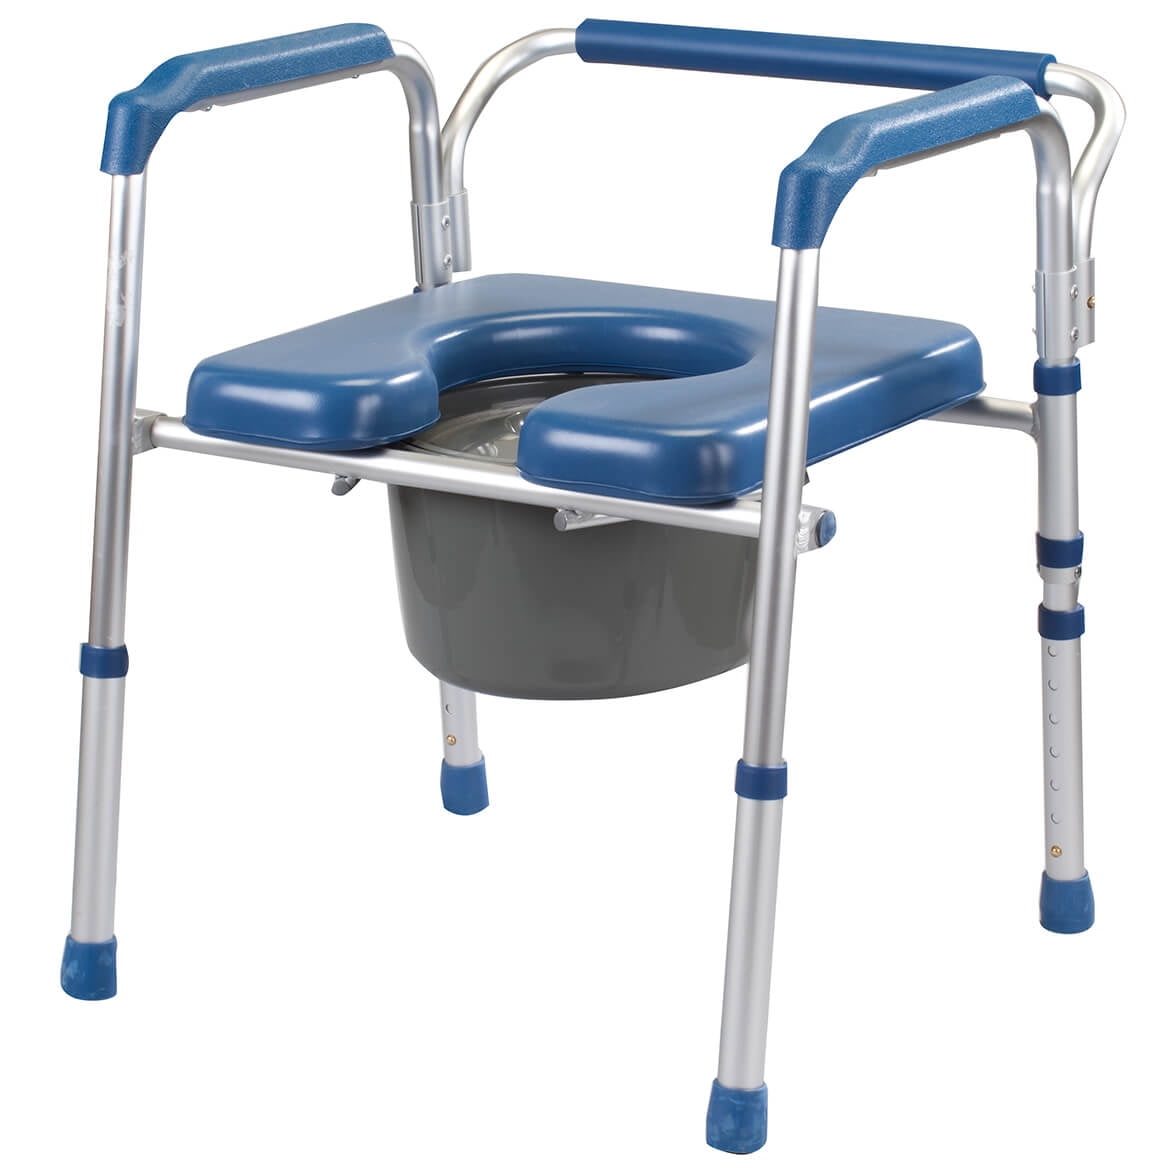 Foldable Commode/Shower Chair Commode Over Toilet Seat Steel Bedside Commode with Armrests Commode Shower Chair for Elderly Shipped from USA!!! 